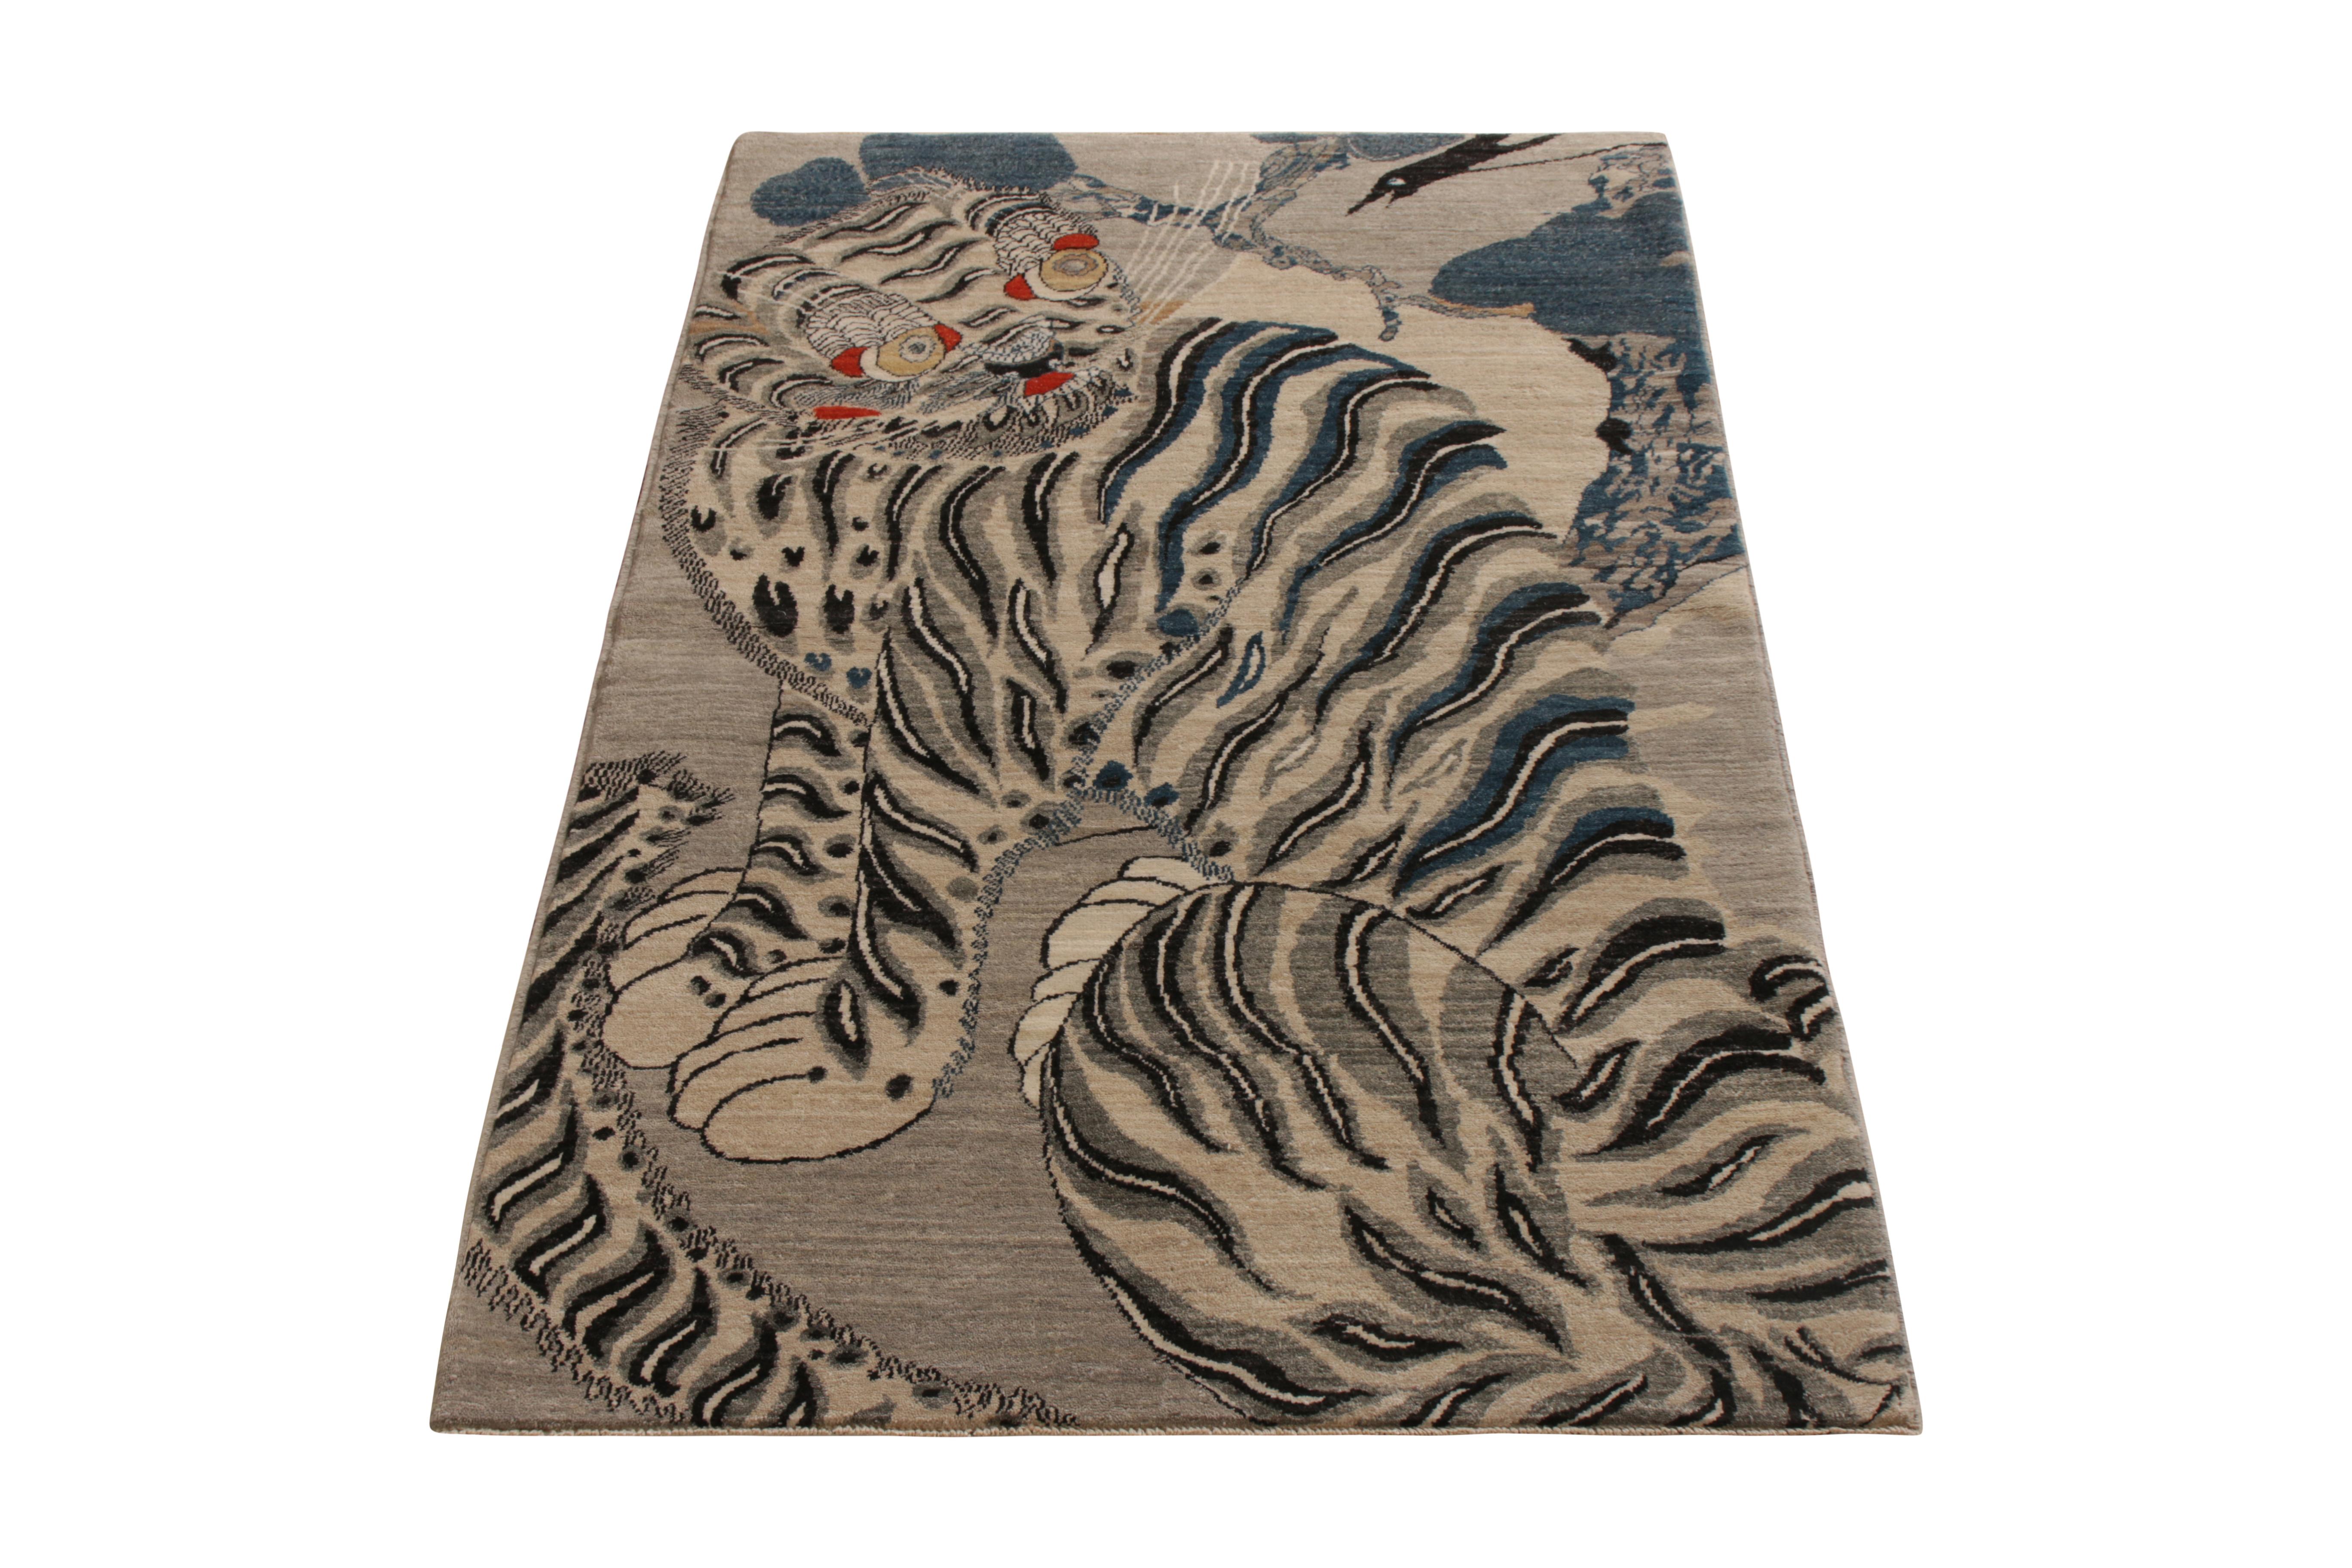 A 3 x 5 ode to celebrated Tiger pictorial rug styles, from the titular new collection by Rug & Kilim. Hand knotted in wool, enjoying a bold white tiger take on positive-negative with white and black beside silver-gray and blue hues. Further sporting